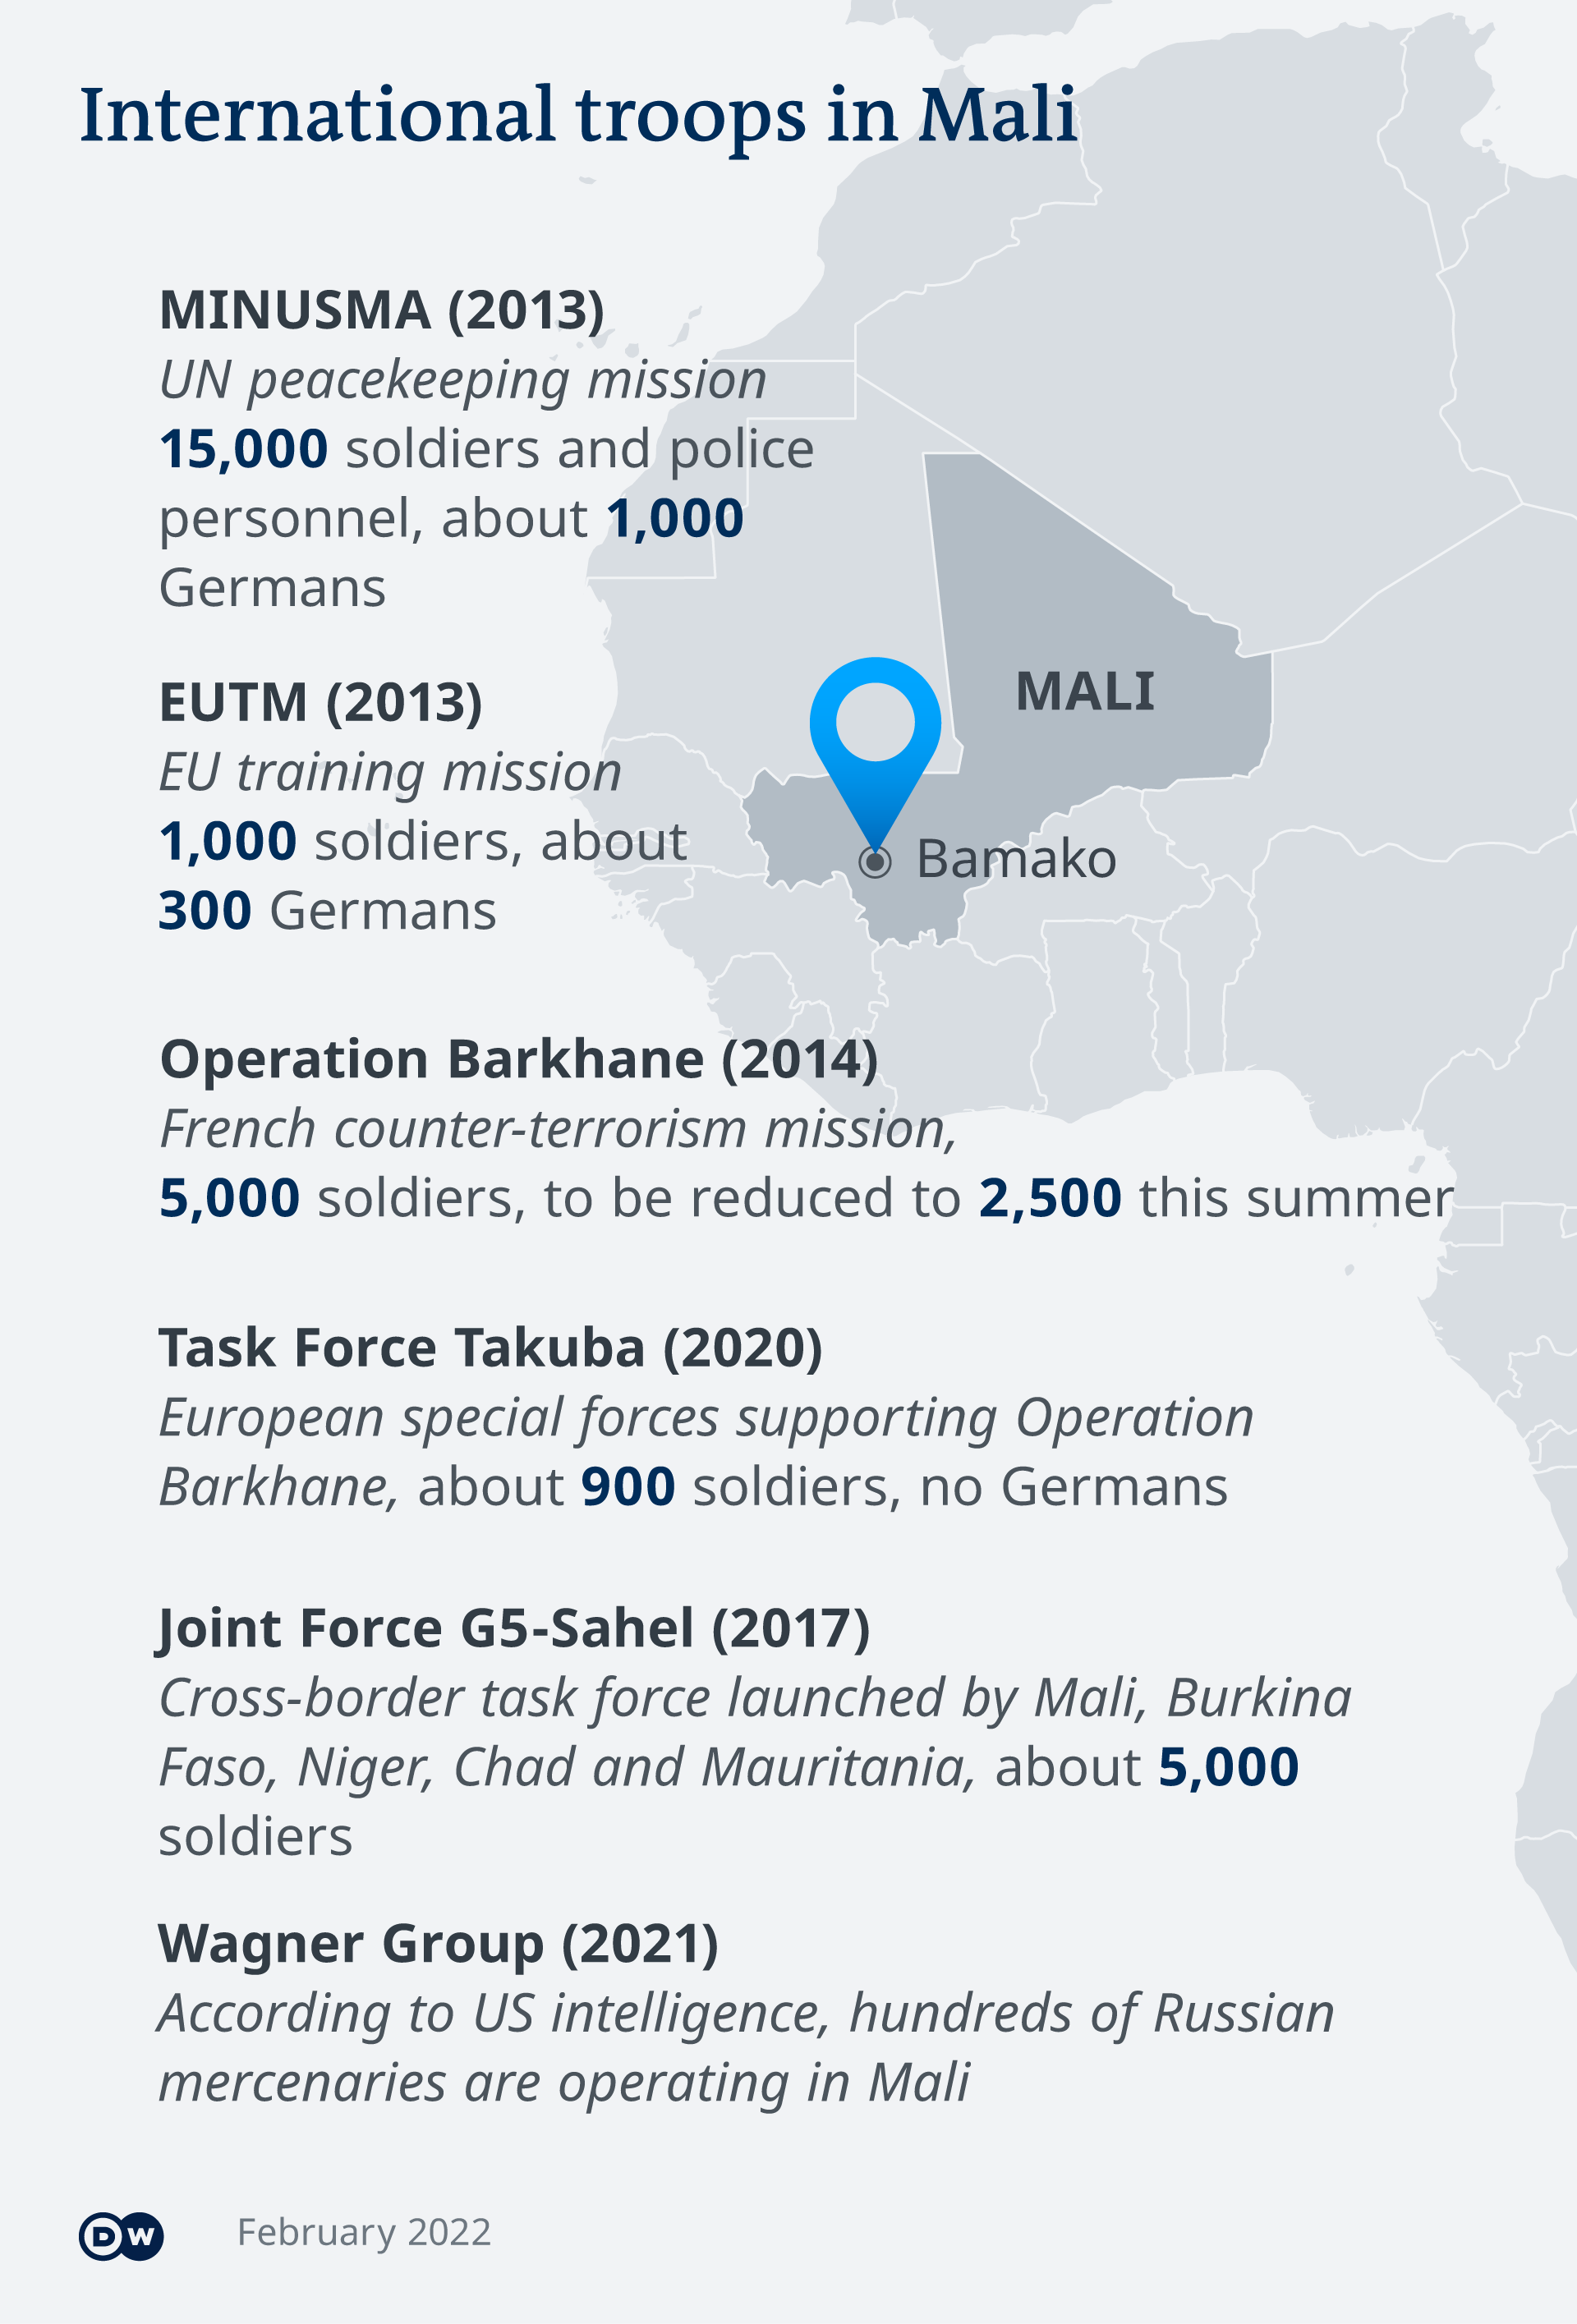 Map of West Africa with Bamako, Mali, highlighted and text with number of troops